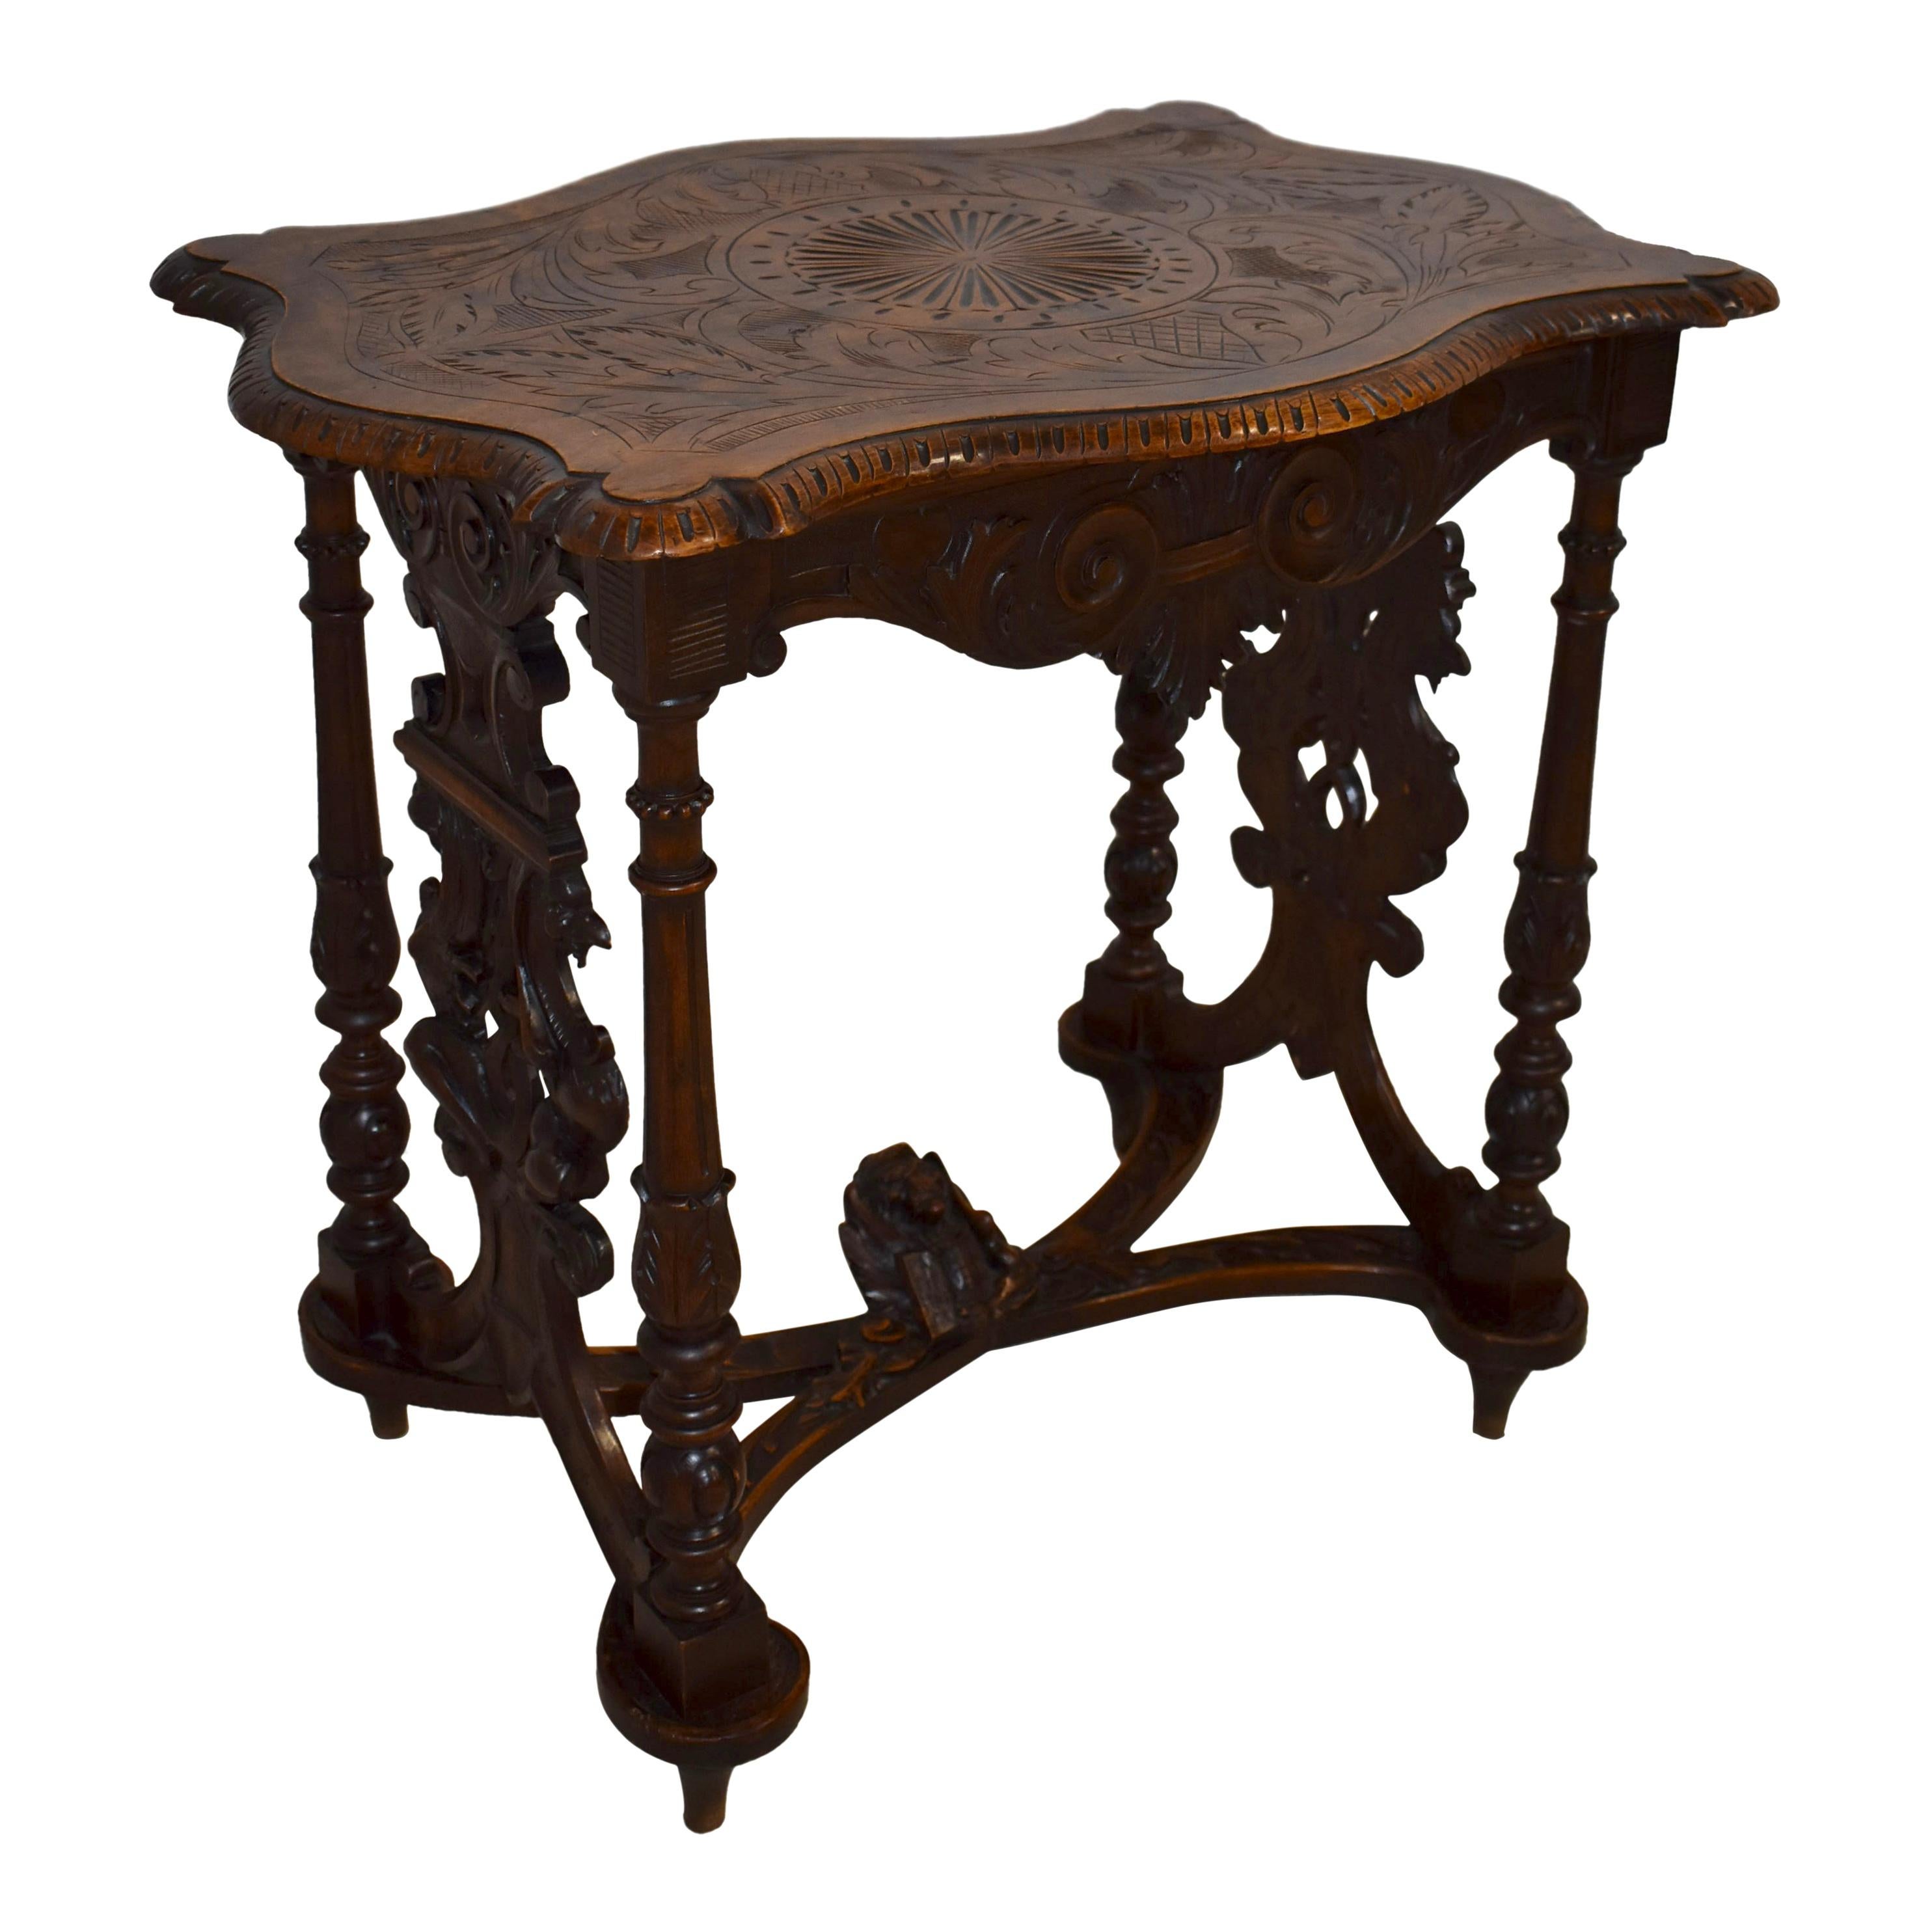 Hand-carved from European oak, this handsome table features a carved scalloped top raised on four turned legs with side carvings uniting the side legs. The lower legs are joined by a curved X stretcher. At the center of the stretcher sits the focal